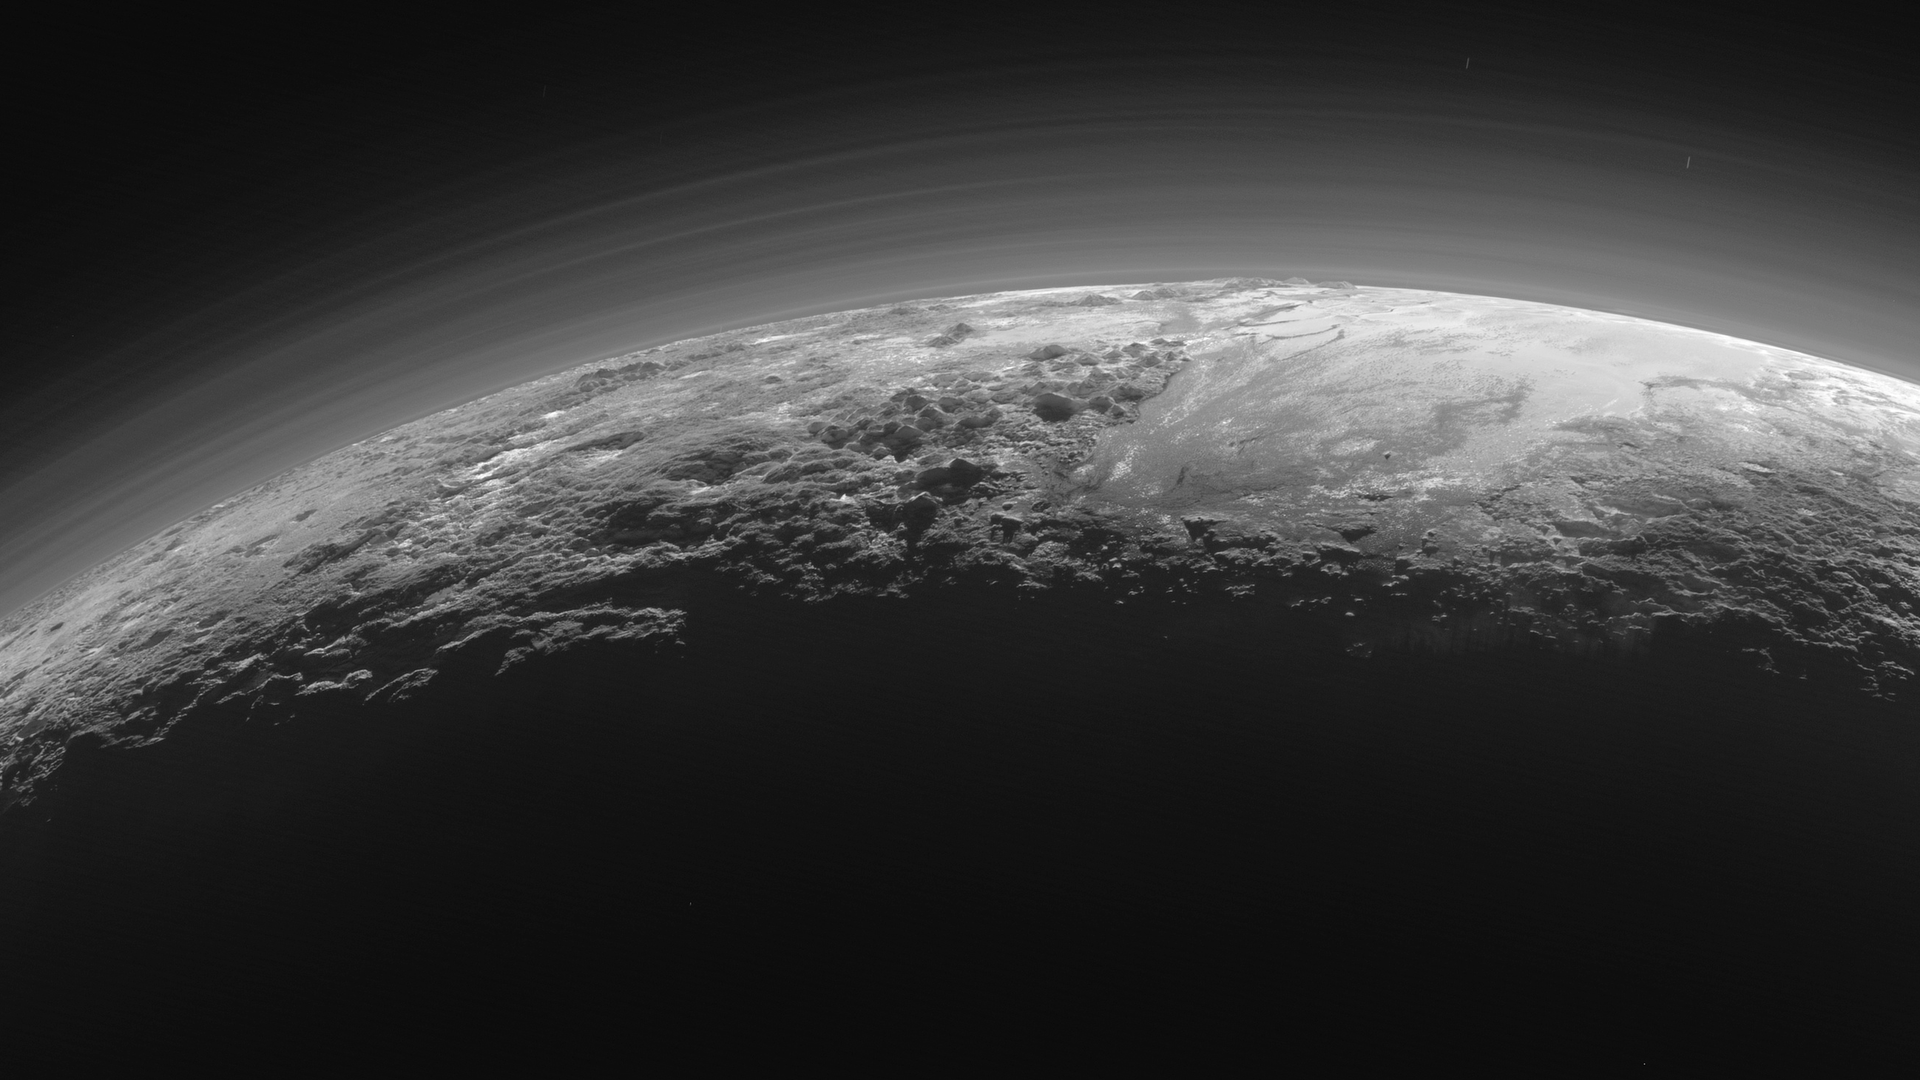 Pluto as seen by the New Horizons probe.